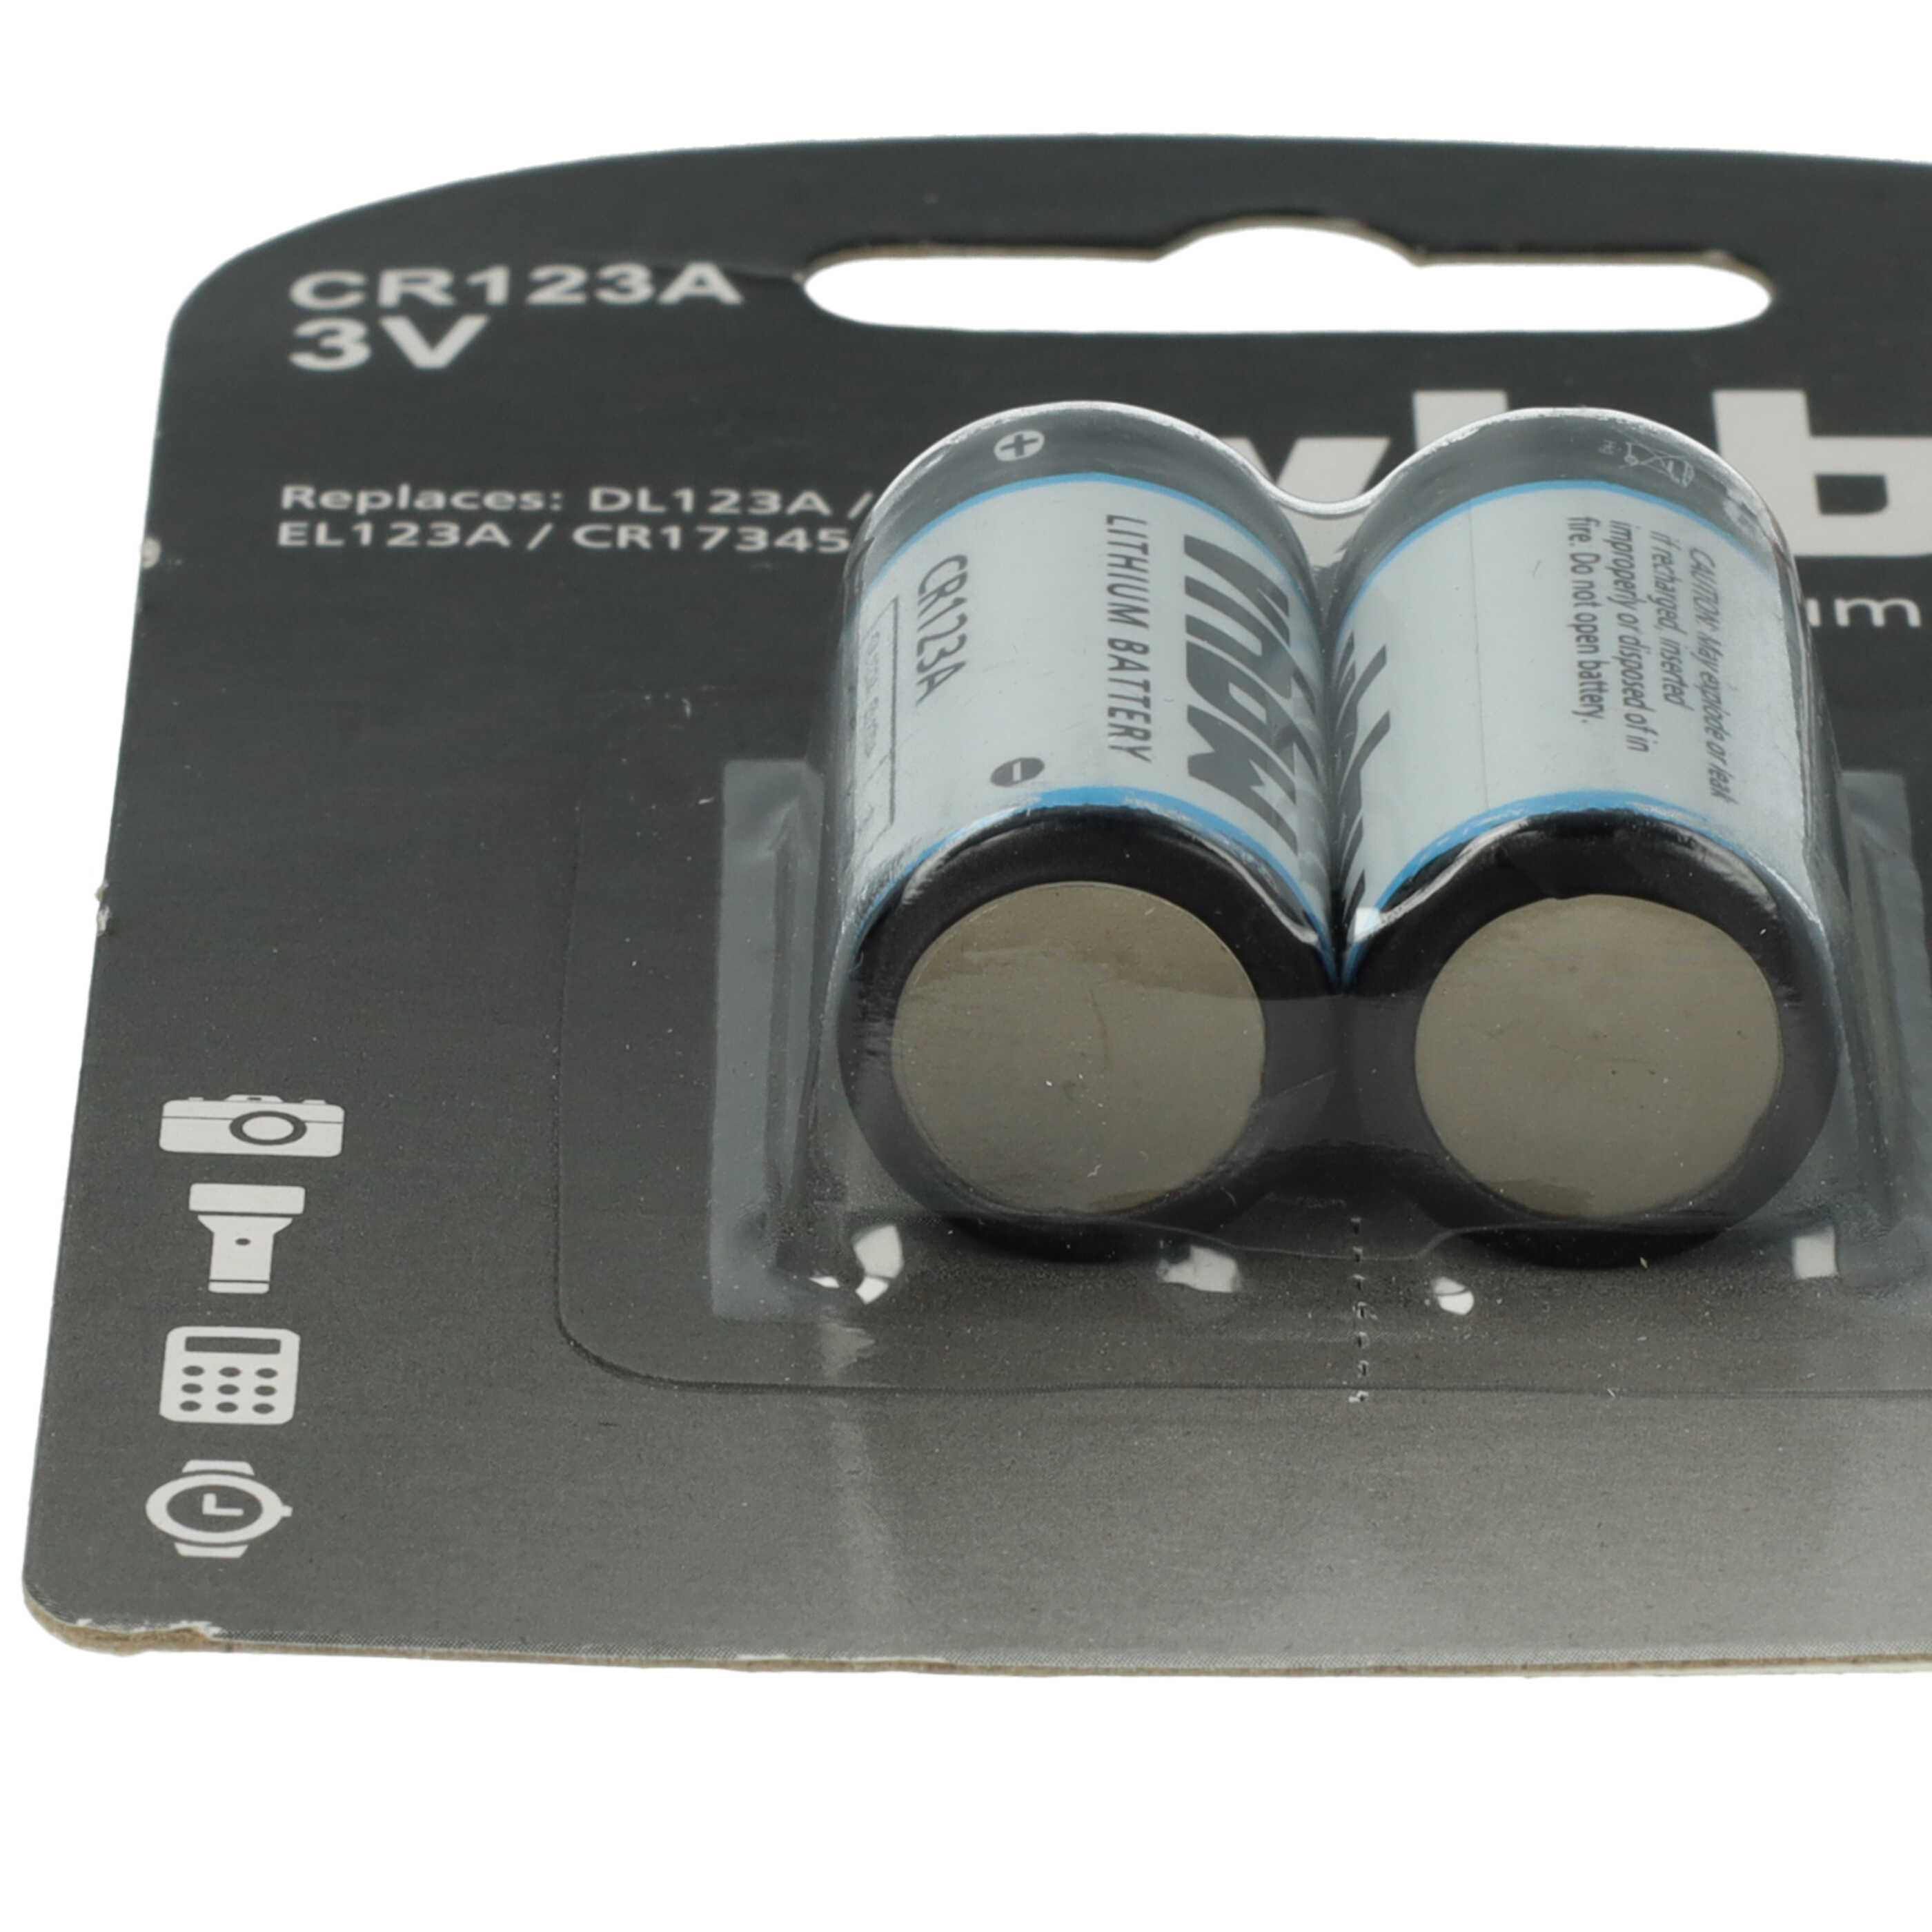 Universal Battery (2 Units) Replacement for 16340, CR17435, DL123A, CR17345, CR123A - 1600mAh 3V Li-Ion